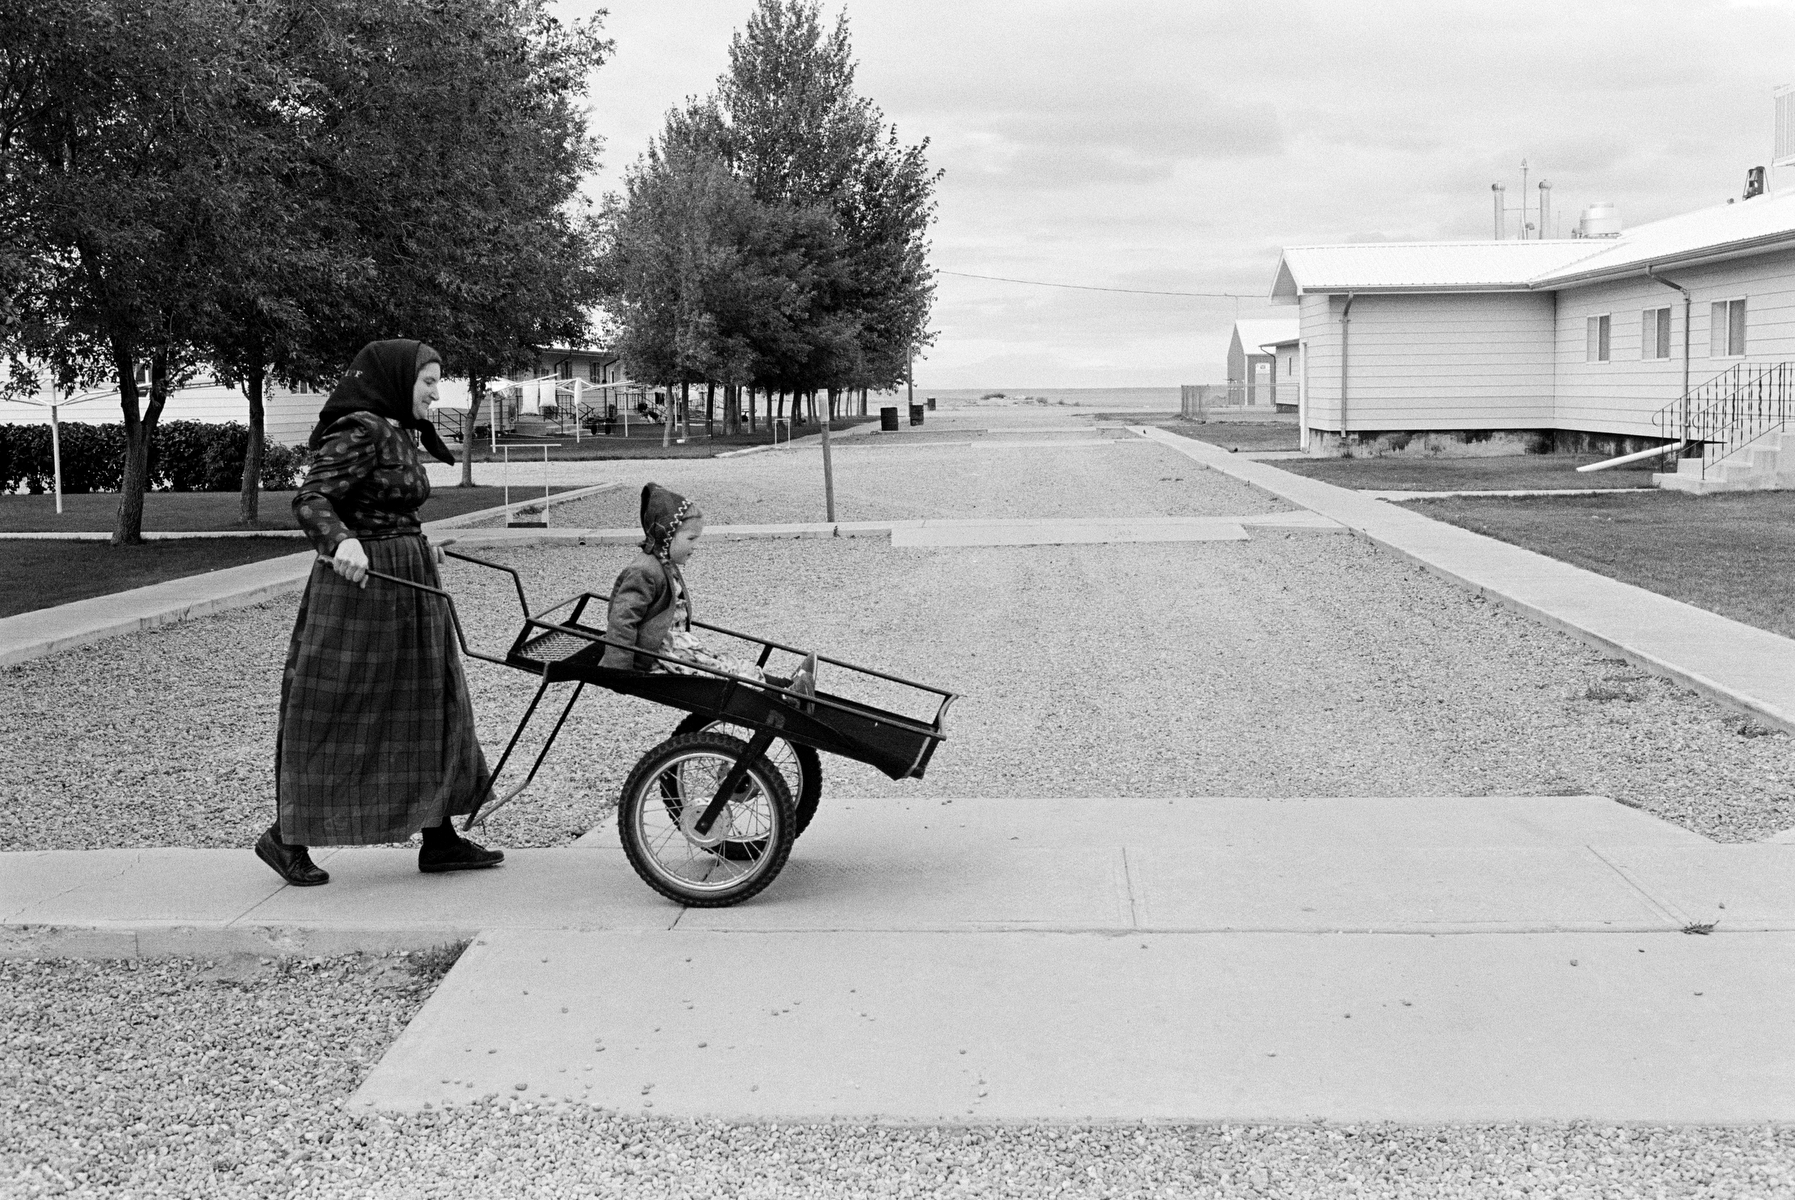 Hutterites living in Montana and Alberta, Canada are a communal branch of Anabaptists who, like the Amish and Mennonites, trace their roots to the Radical Reformation of the 16th century. 